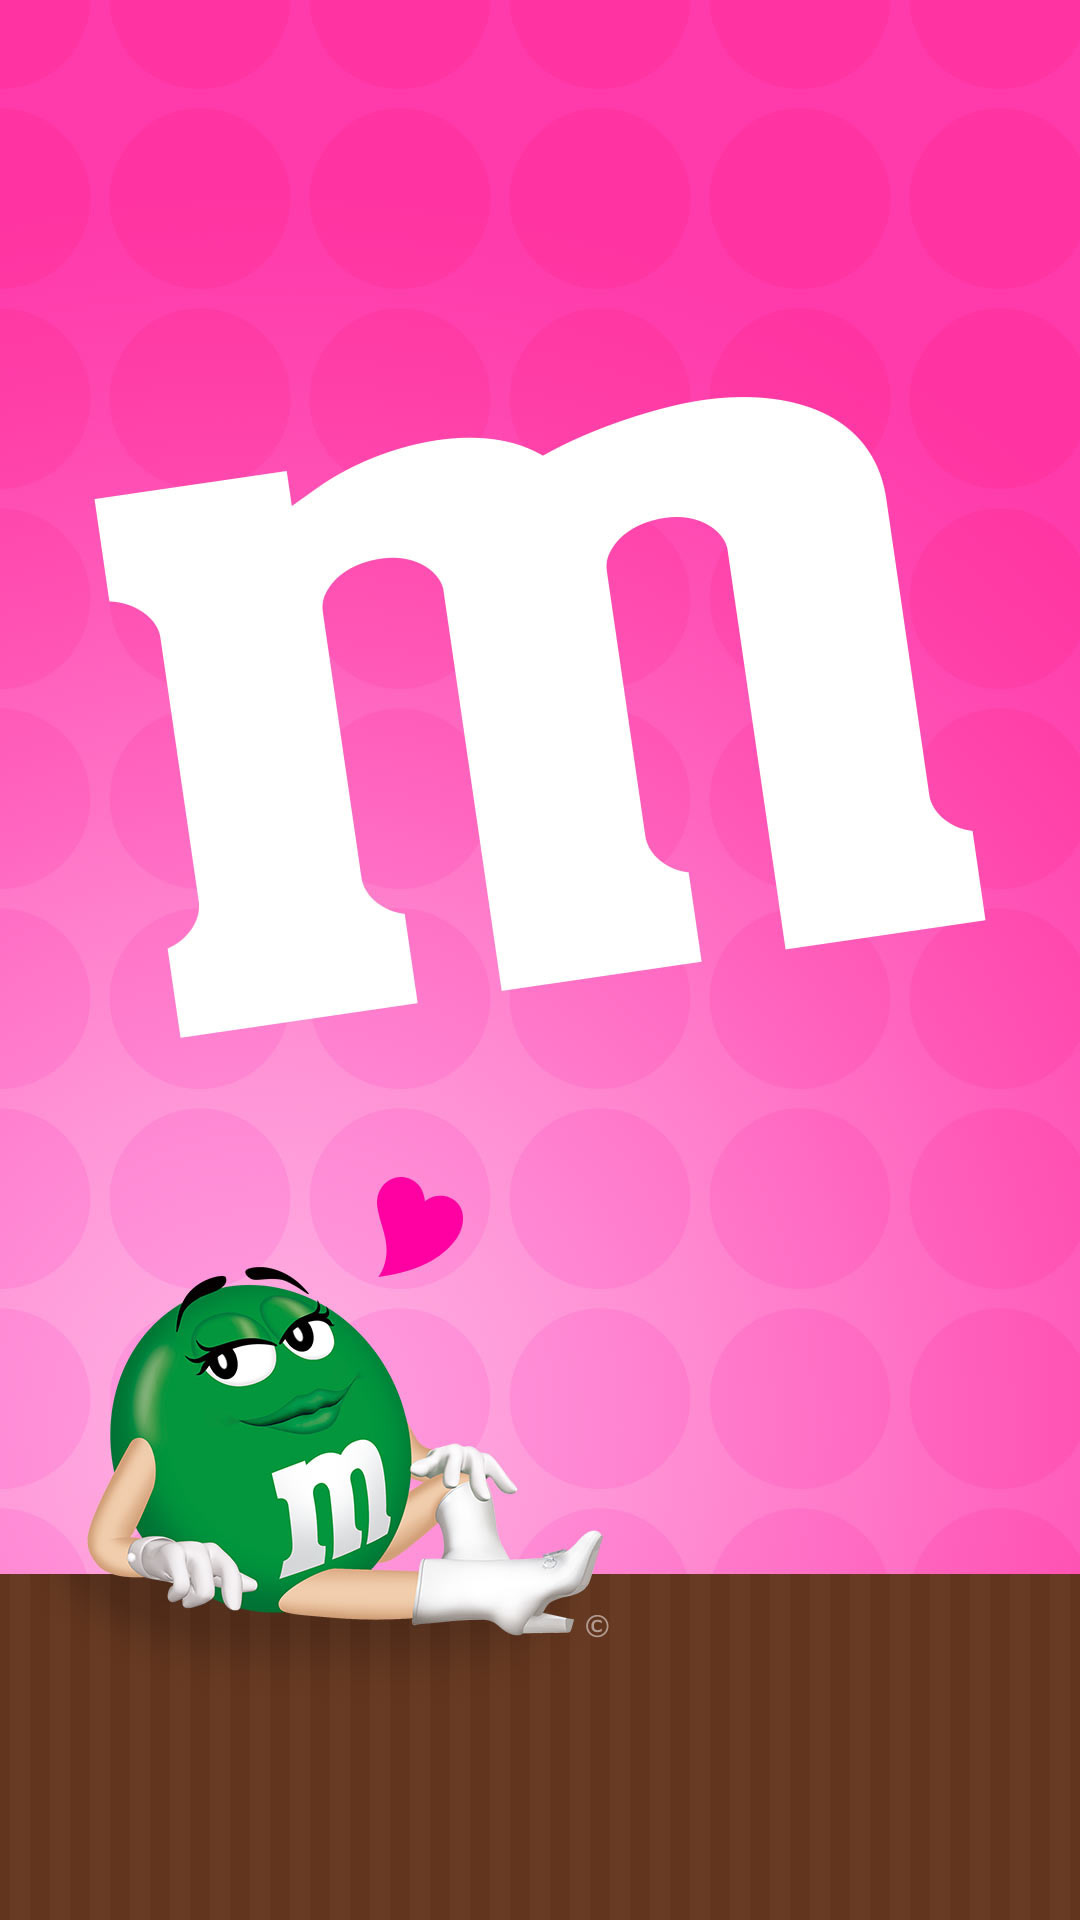 Vibrant M&M's, Eye-catching wallpapers, Tasty delights, Sugar-coated goodness, 1080x1920 Full HD Handy